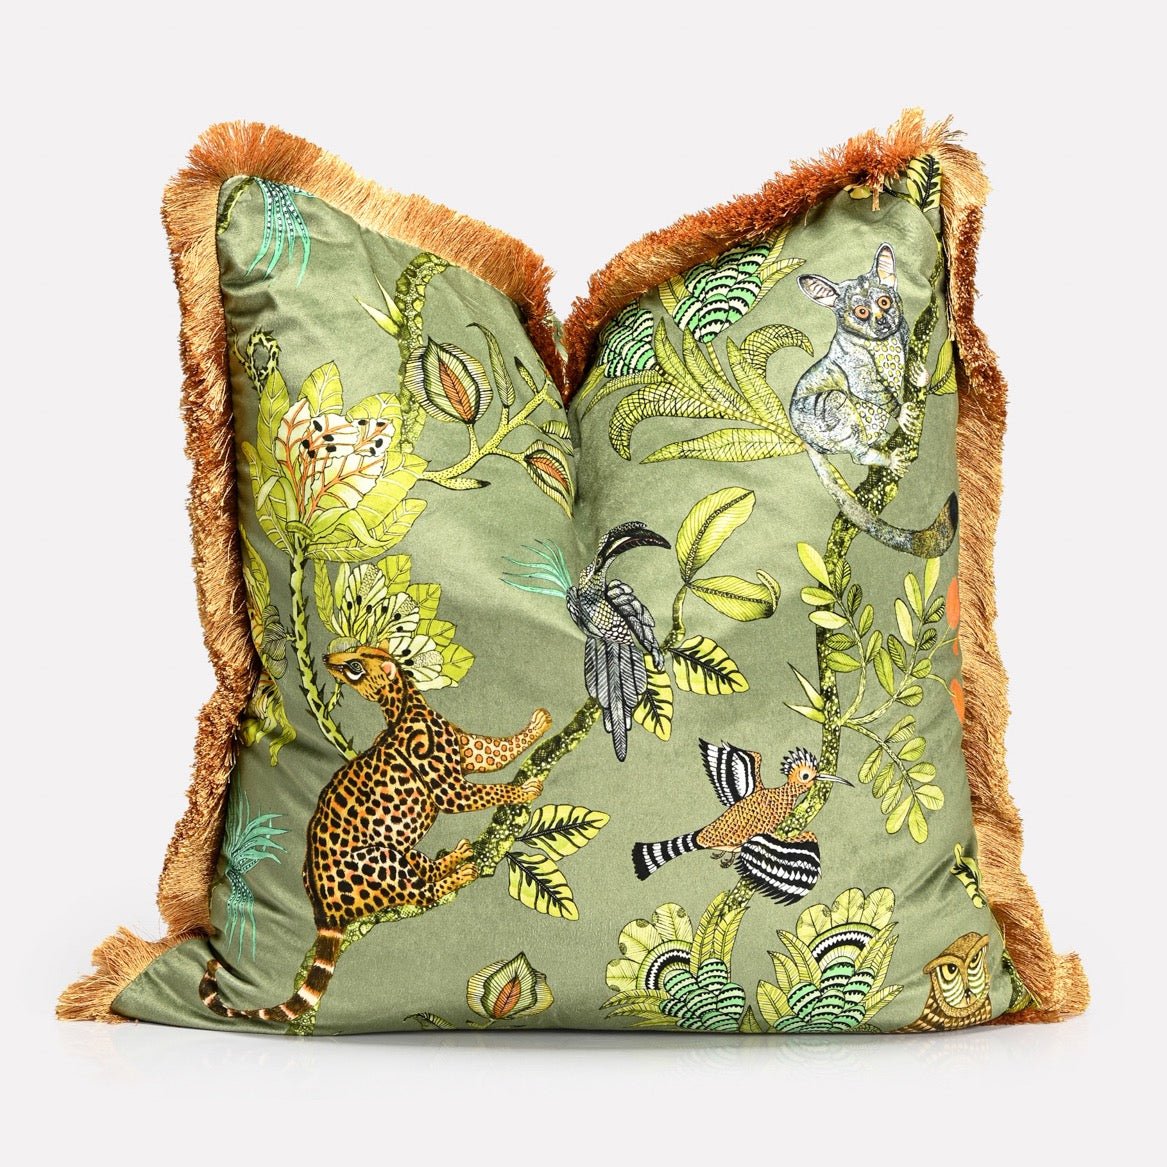 Camp Critters Delta Fringed Cushion Cover